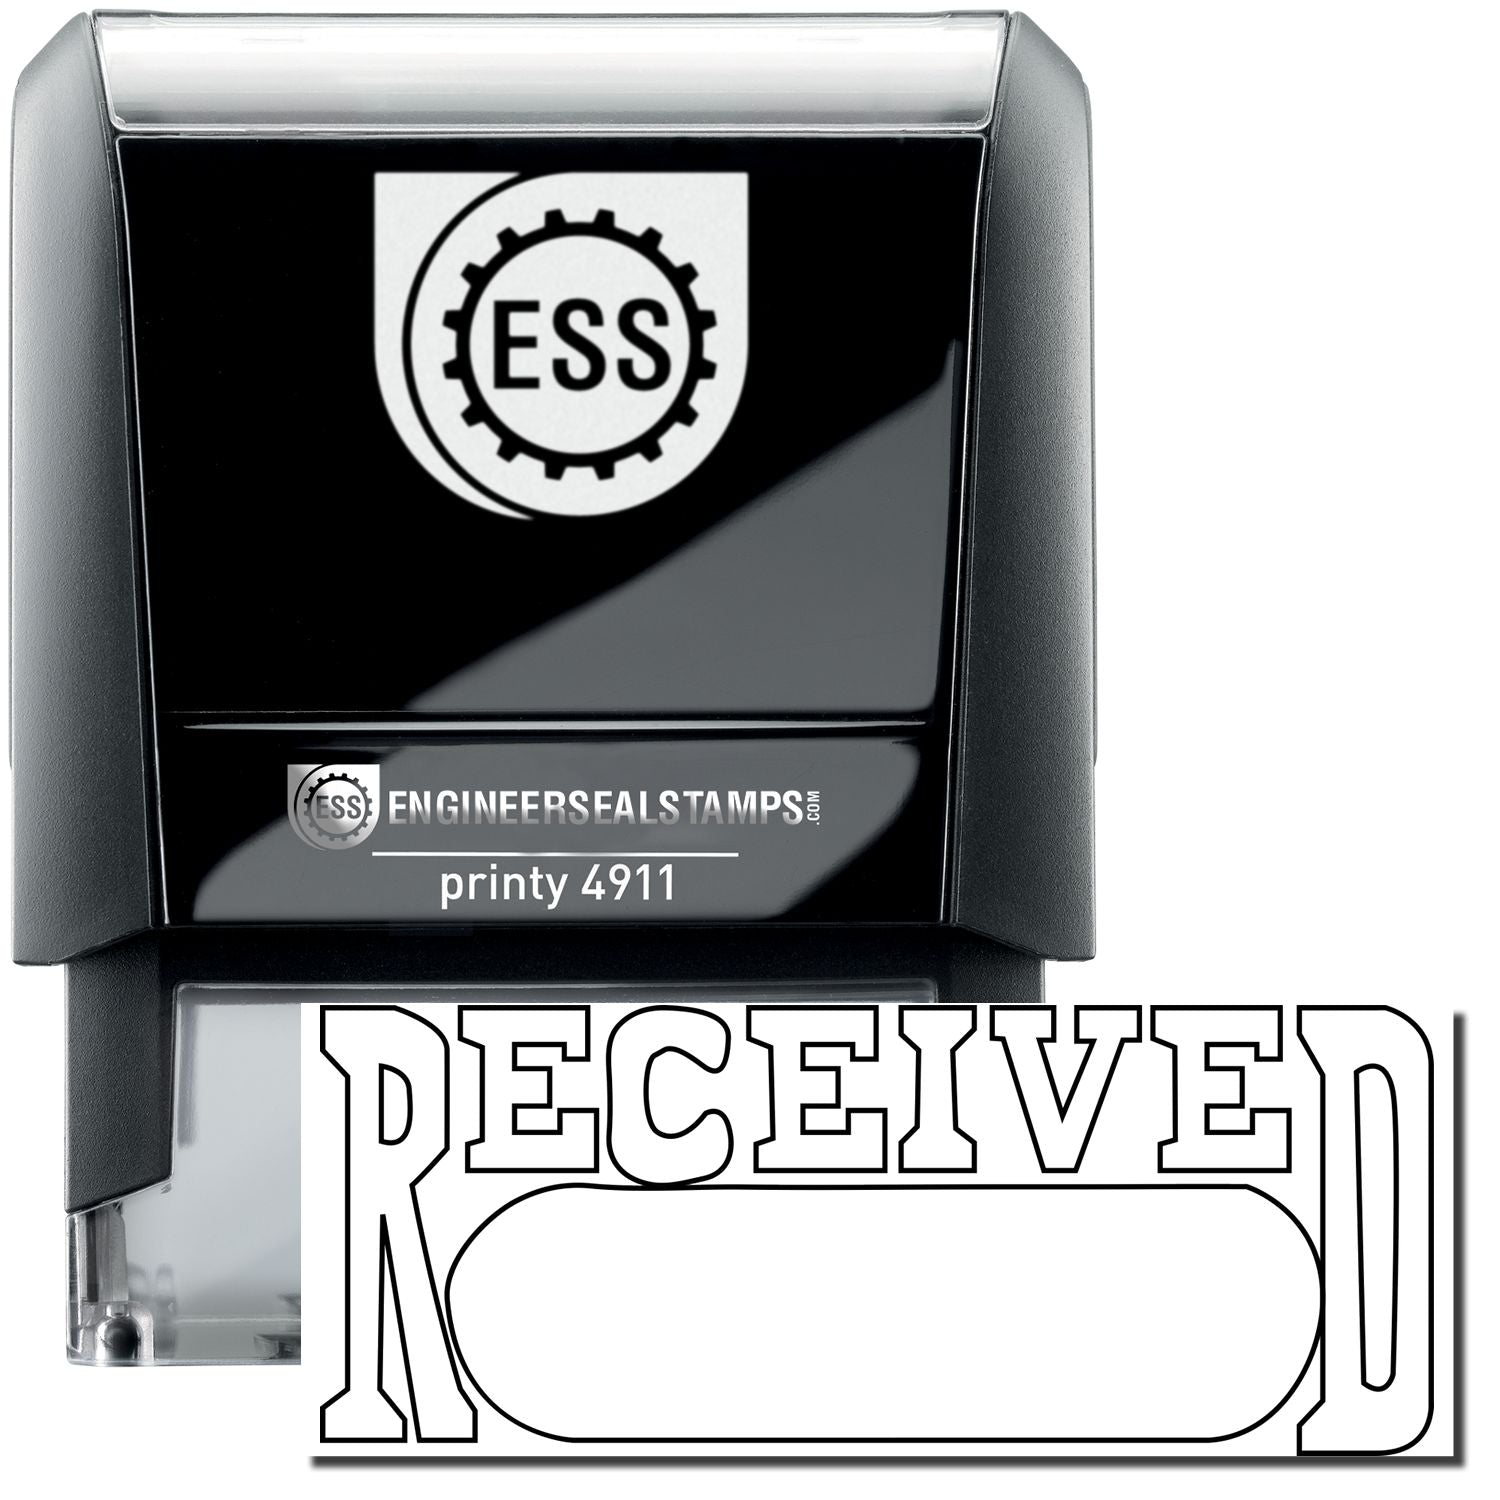 A self-inking stamp with a stamped image showing how the text "RECEIVED" in an outline font with a date box is displayed after stamping.